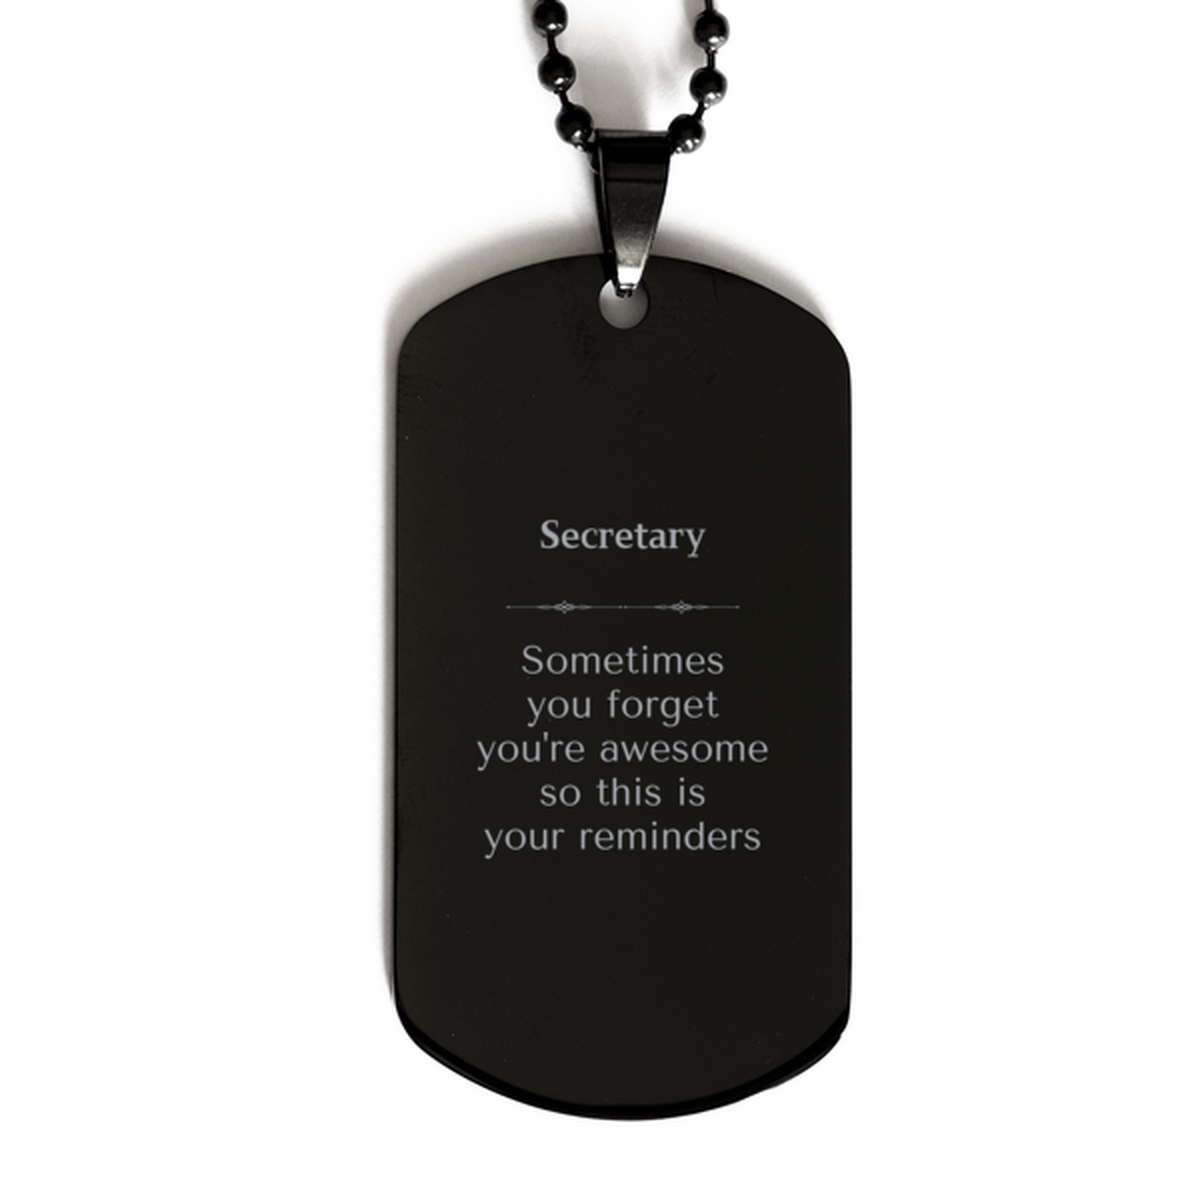 Sentimental Secretary Black Dog Tag, Secretary Sometimes you forget you're awesome so this is your reminders, Graduation Christmas Birthday Gifts for Secretary, Men, Women, Coworkers